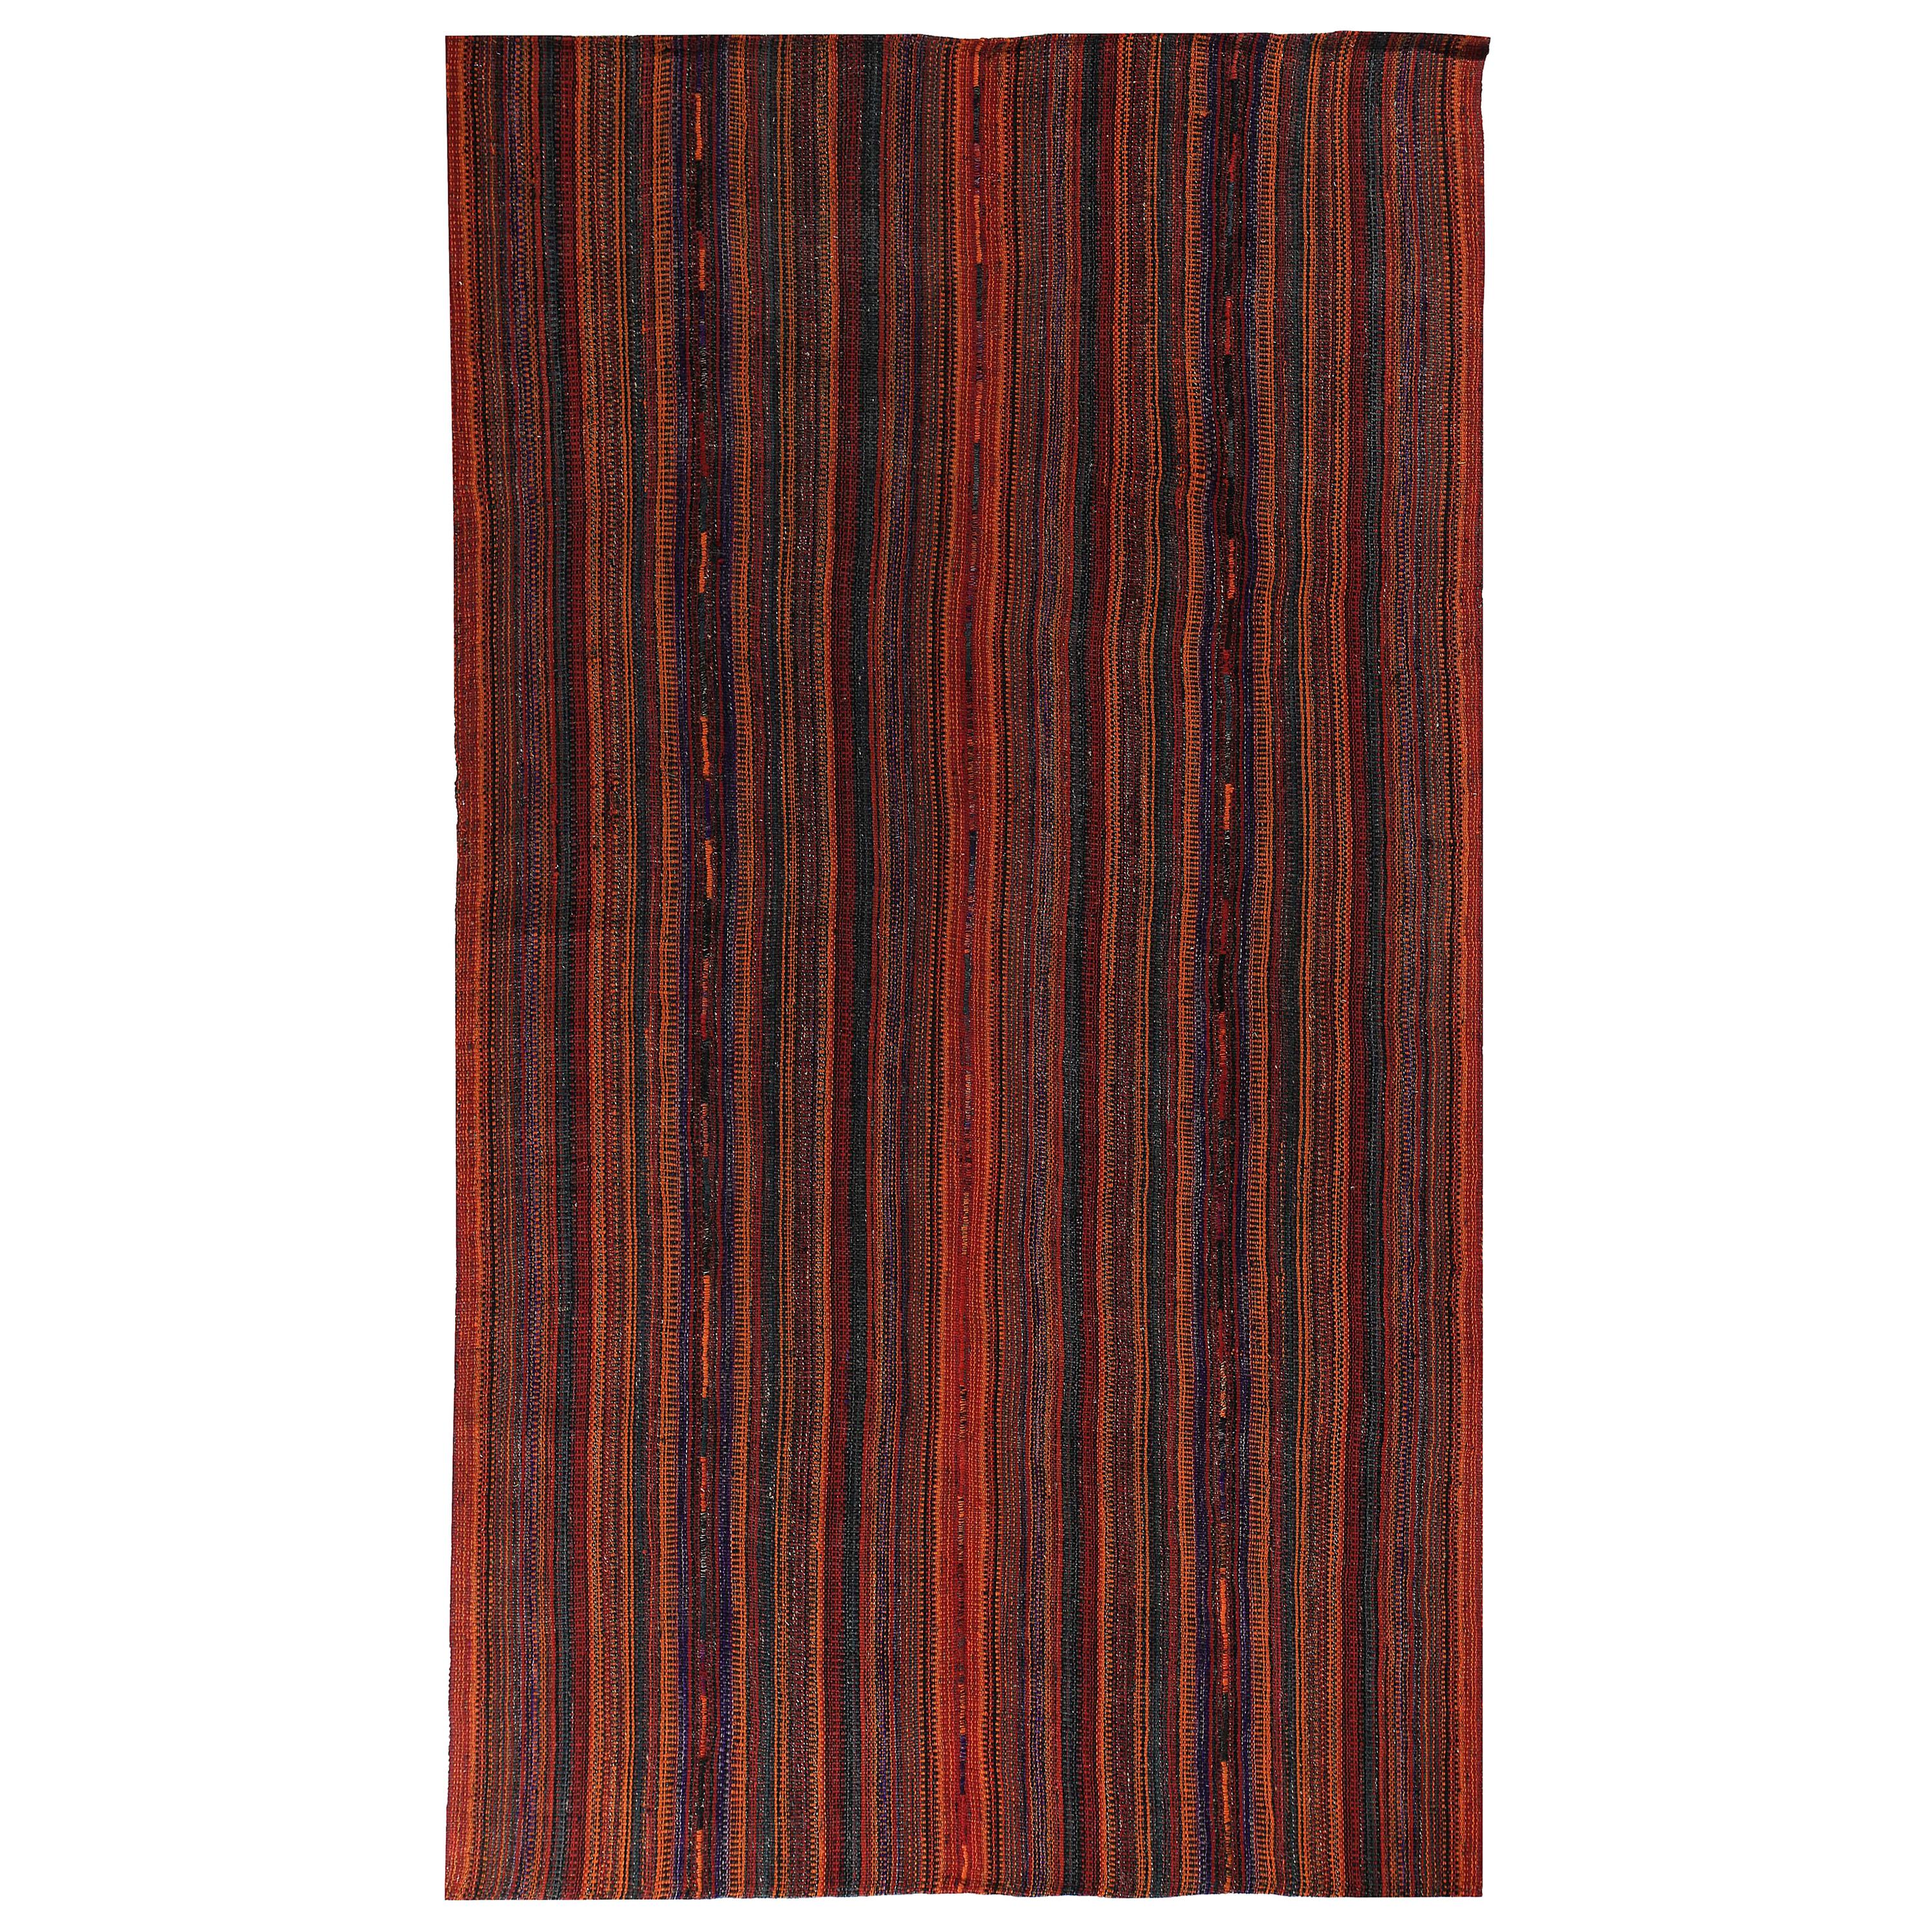 New Turkish Kilim Rug with Black and Red Tribal Stripes